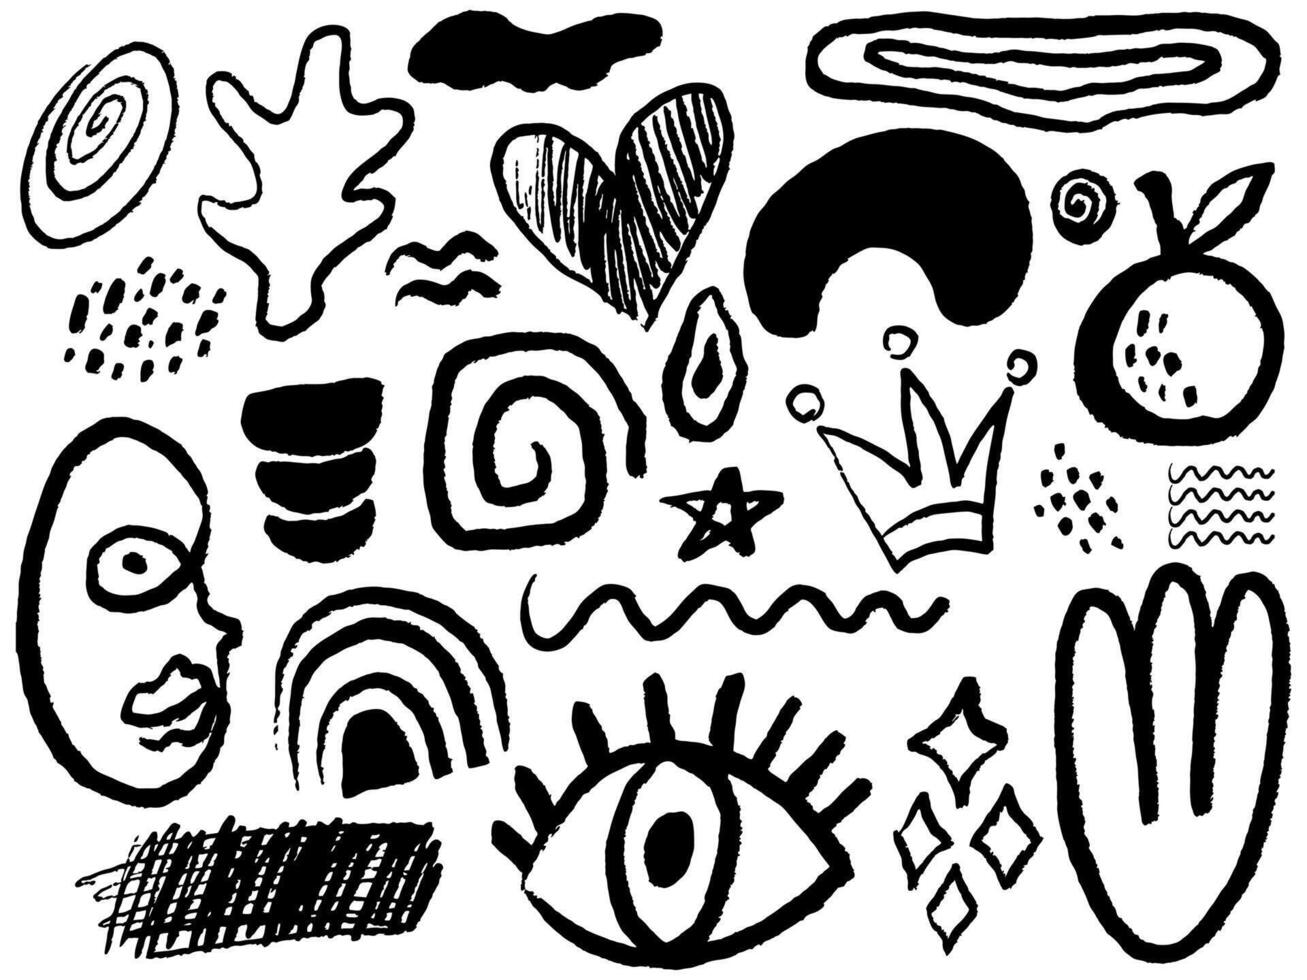 Charcoal graffiti doodle different shapes collection. Hand drawn abstract scribbles and squiggles, creative various shapes, pencil drawn icons vector